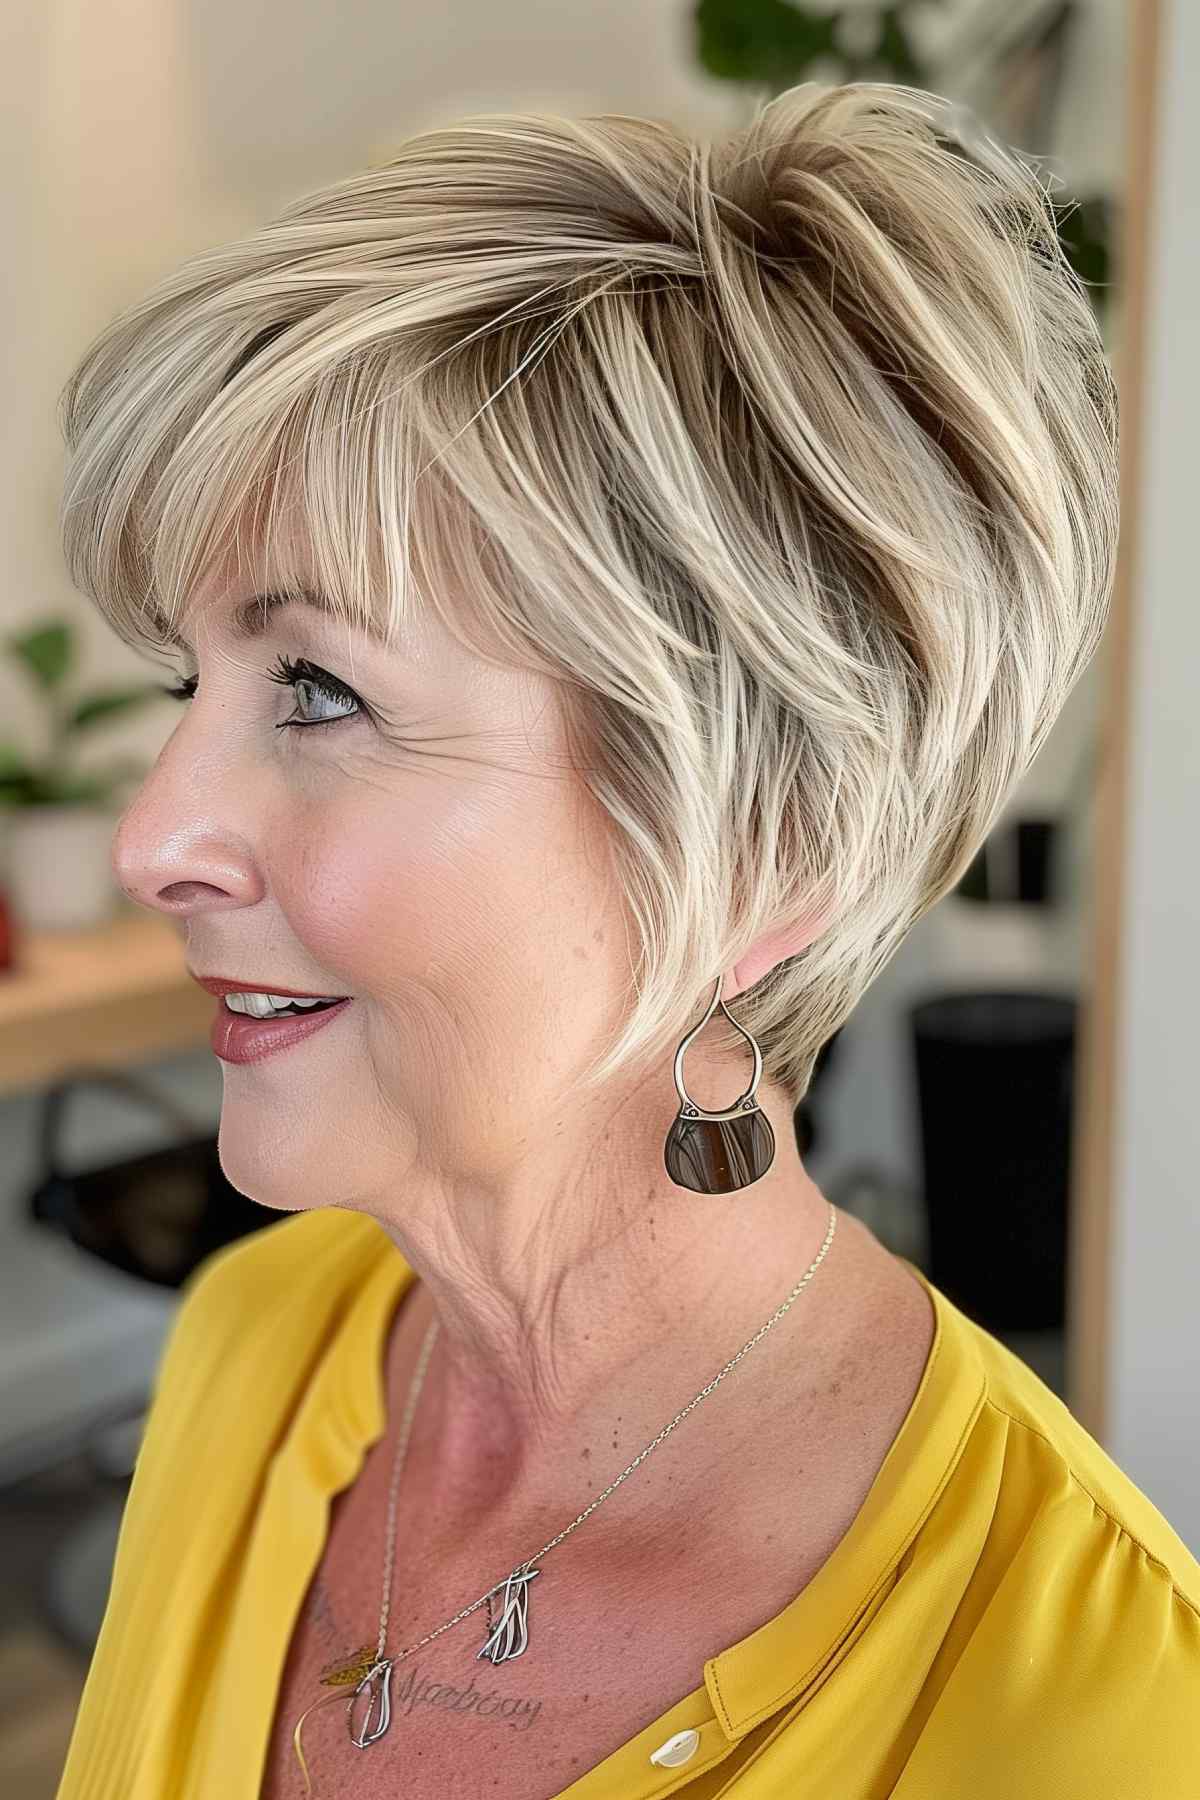 The woman sported a choppy layered pixie cut with light blonde coloring and subtle lowlights.